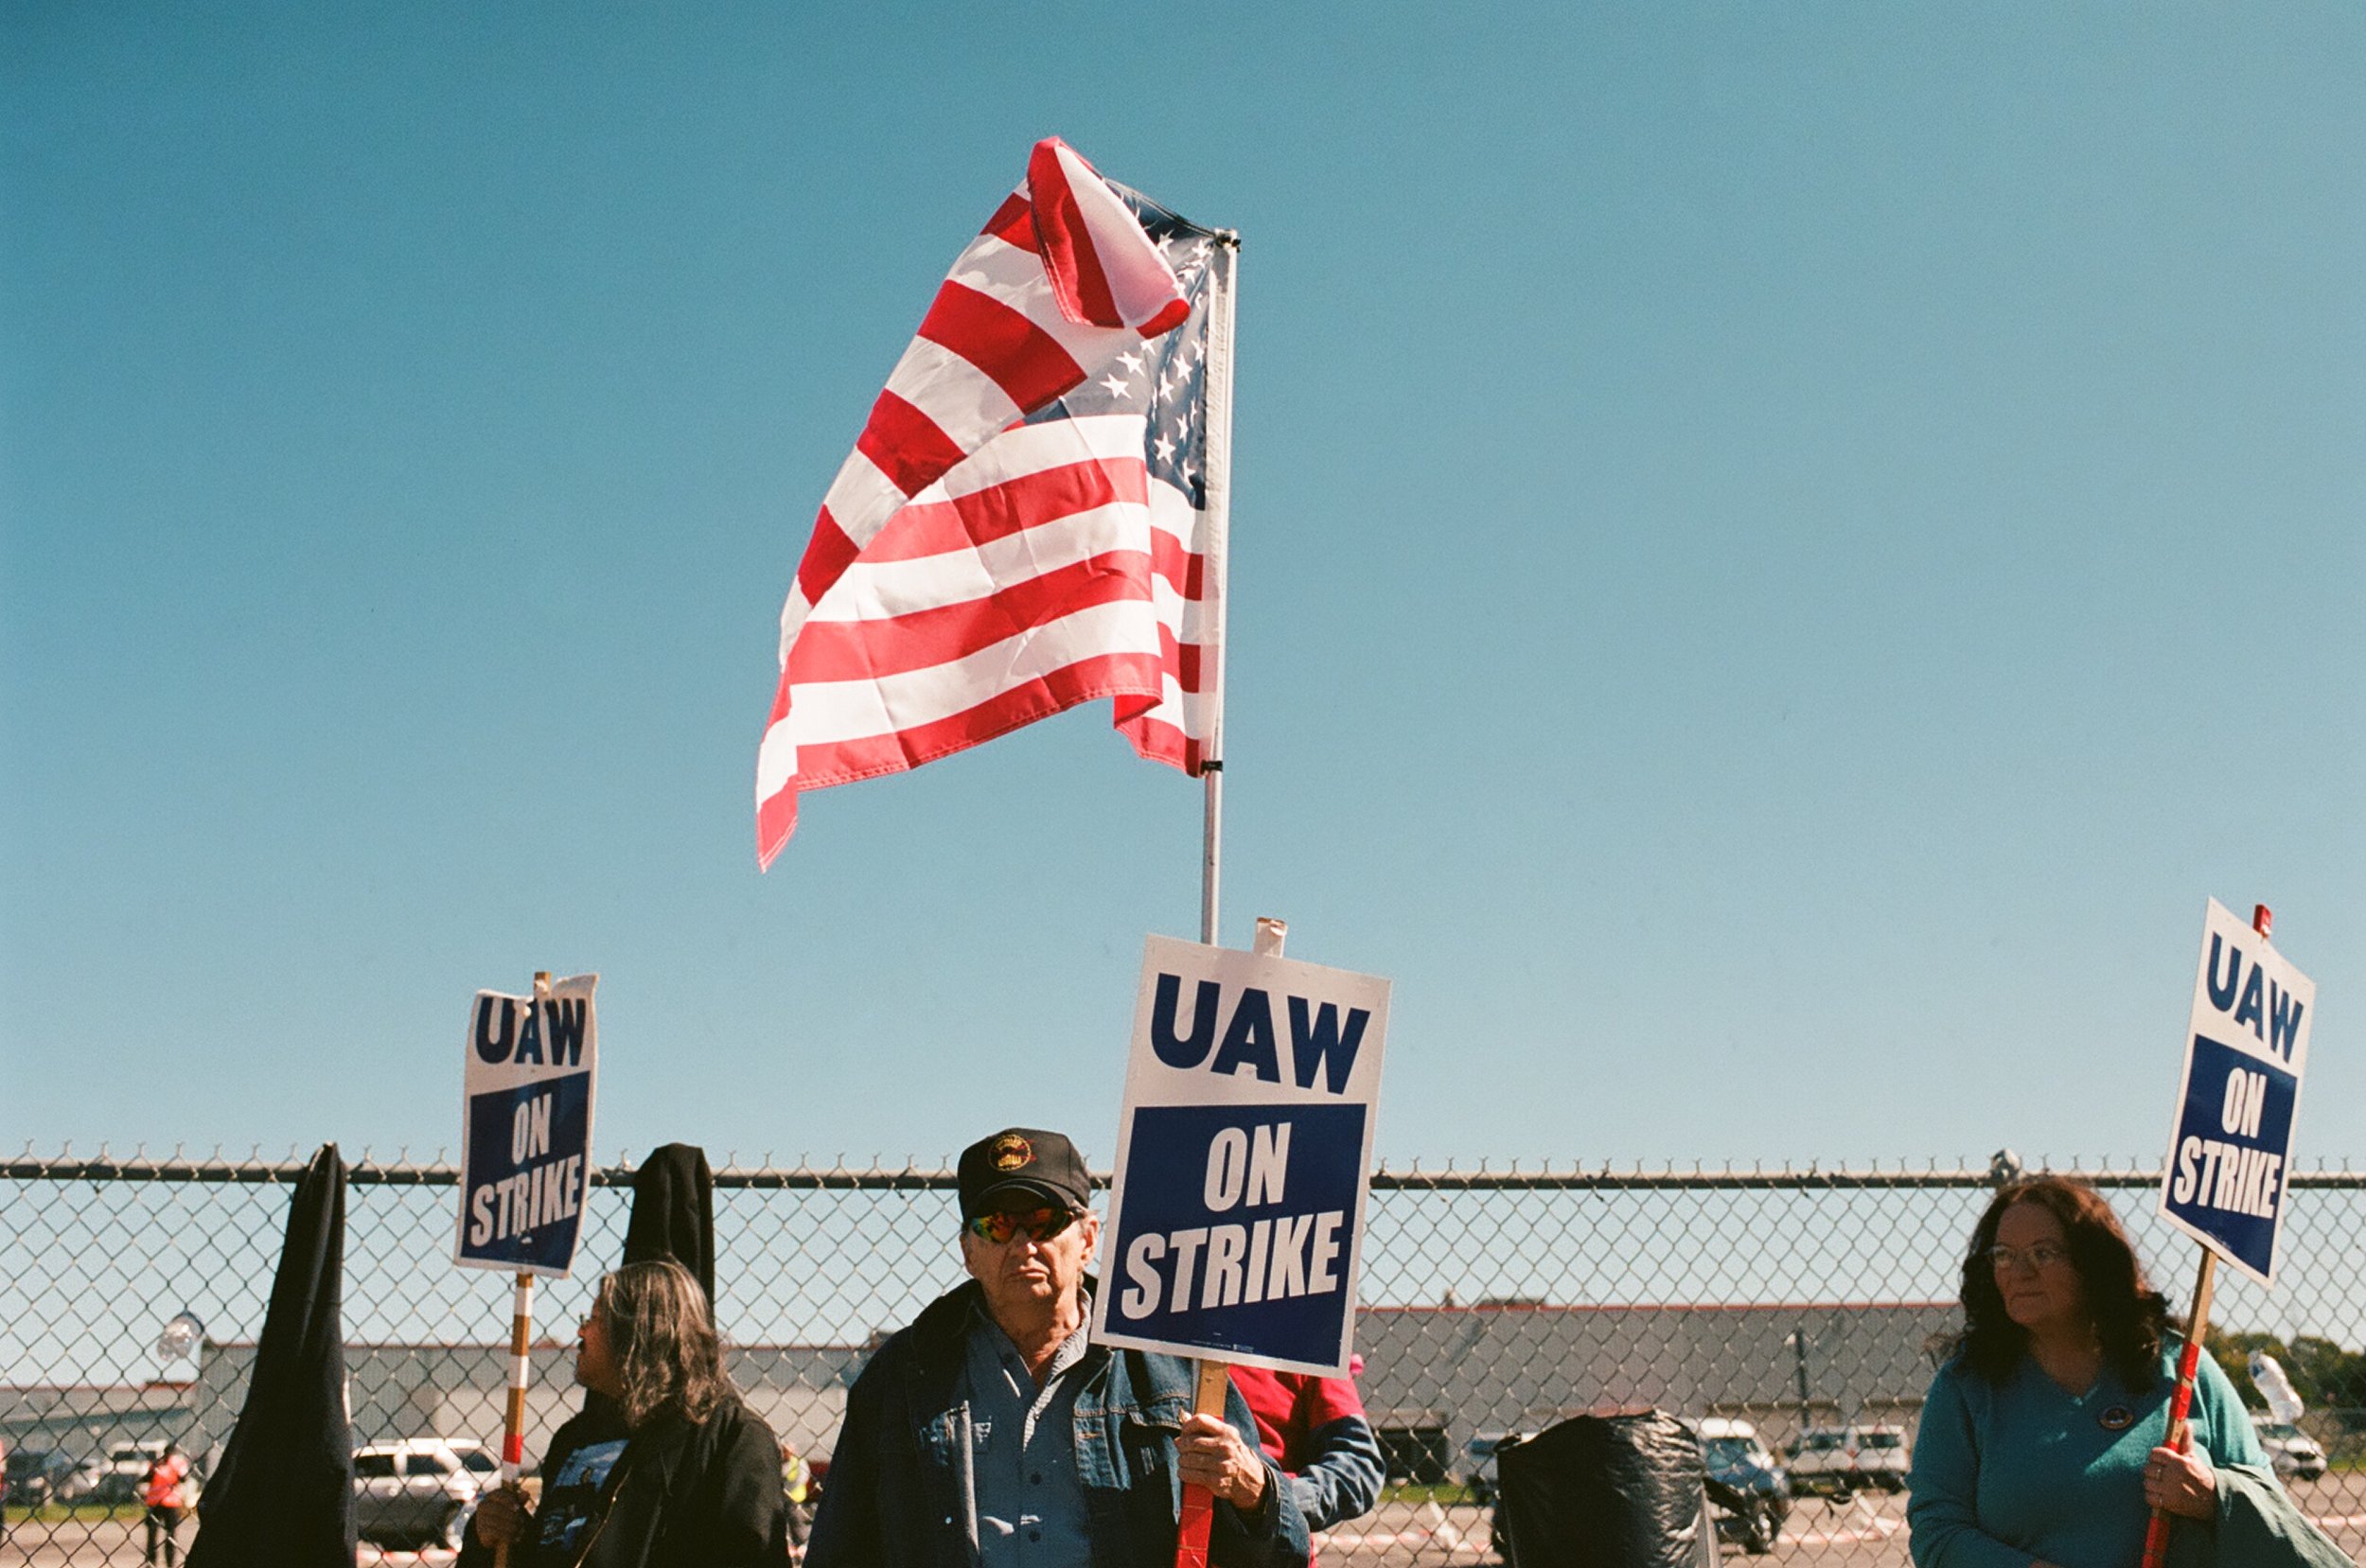 UAW labor union member on strike from CNH captured on film in Wisconsin, 2022